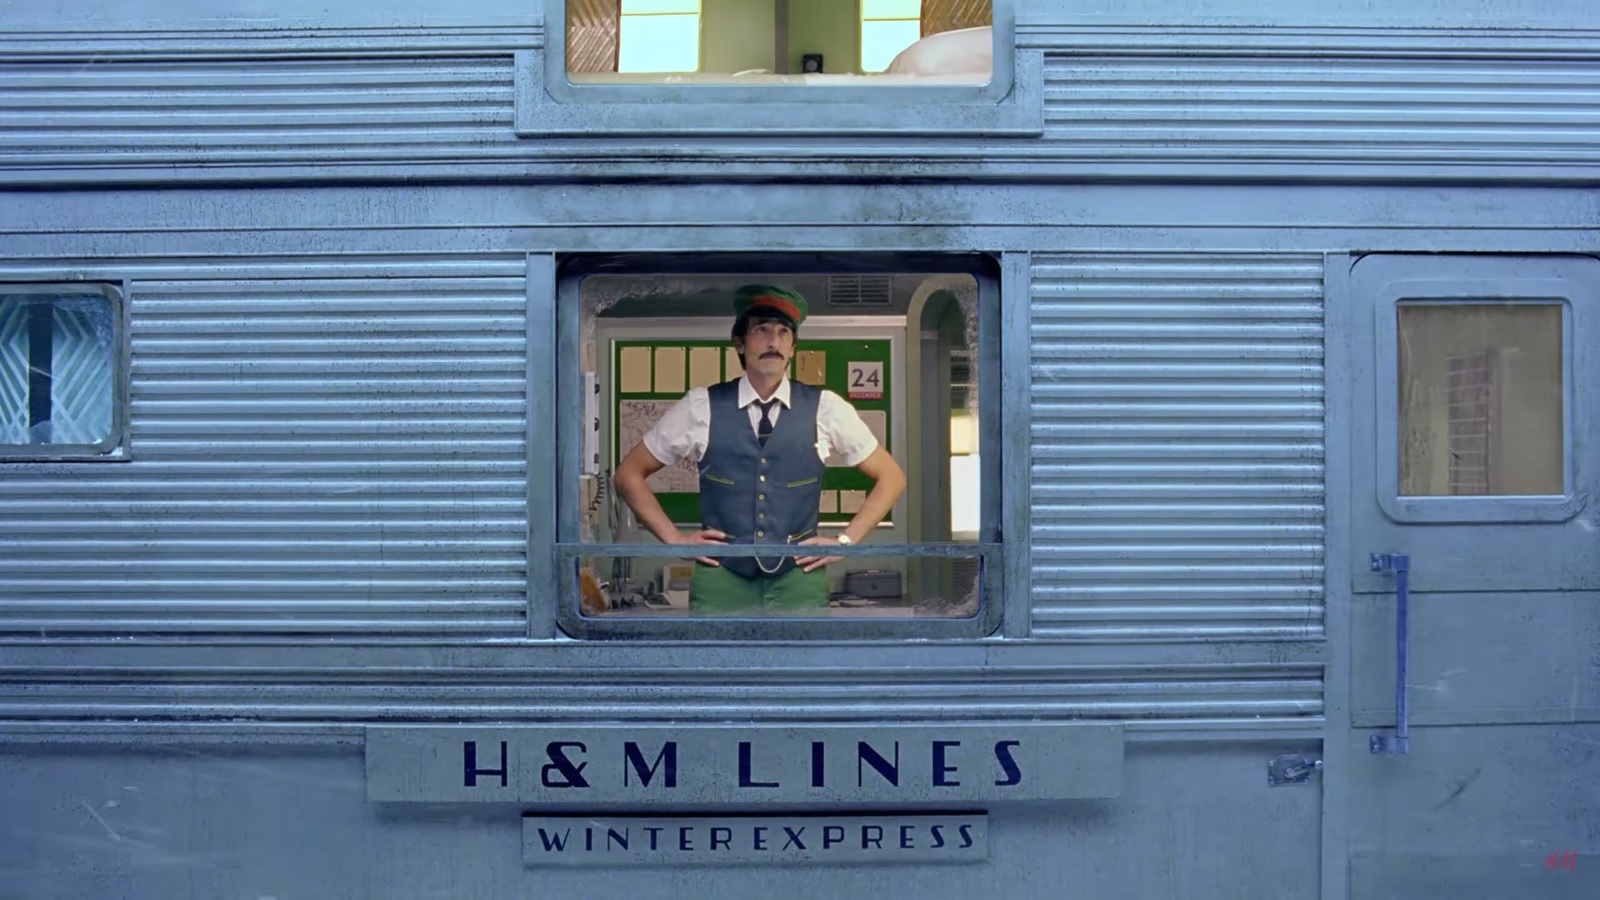 The H&M Express Starring Adrien Brody Takes You Right to Station Christmas